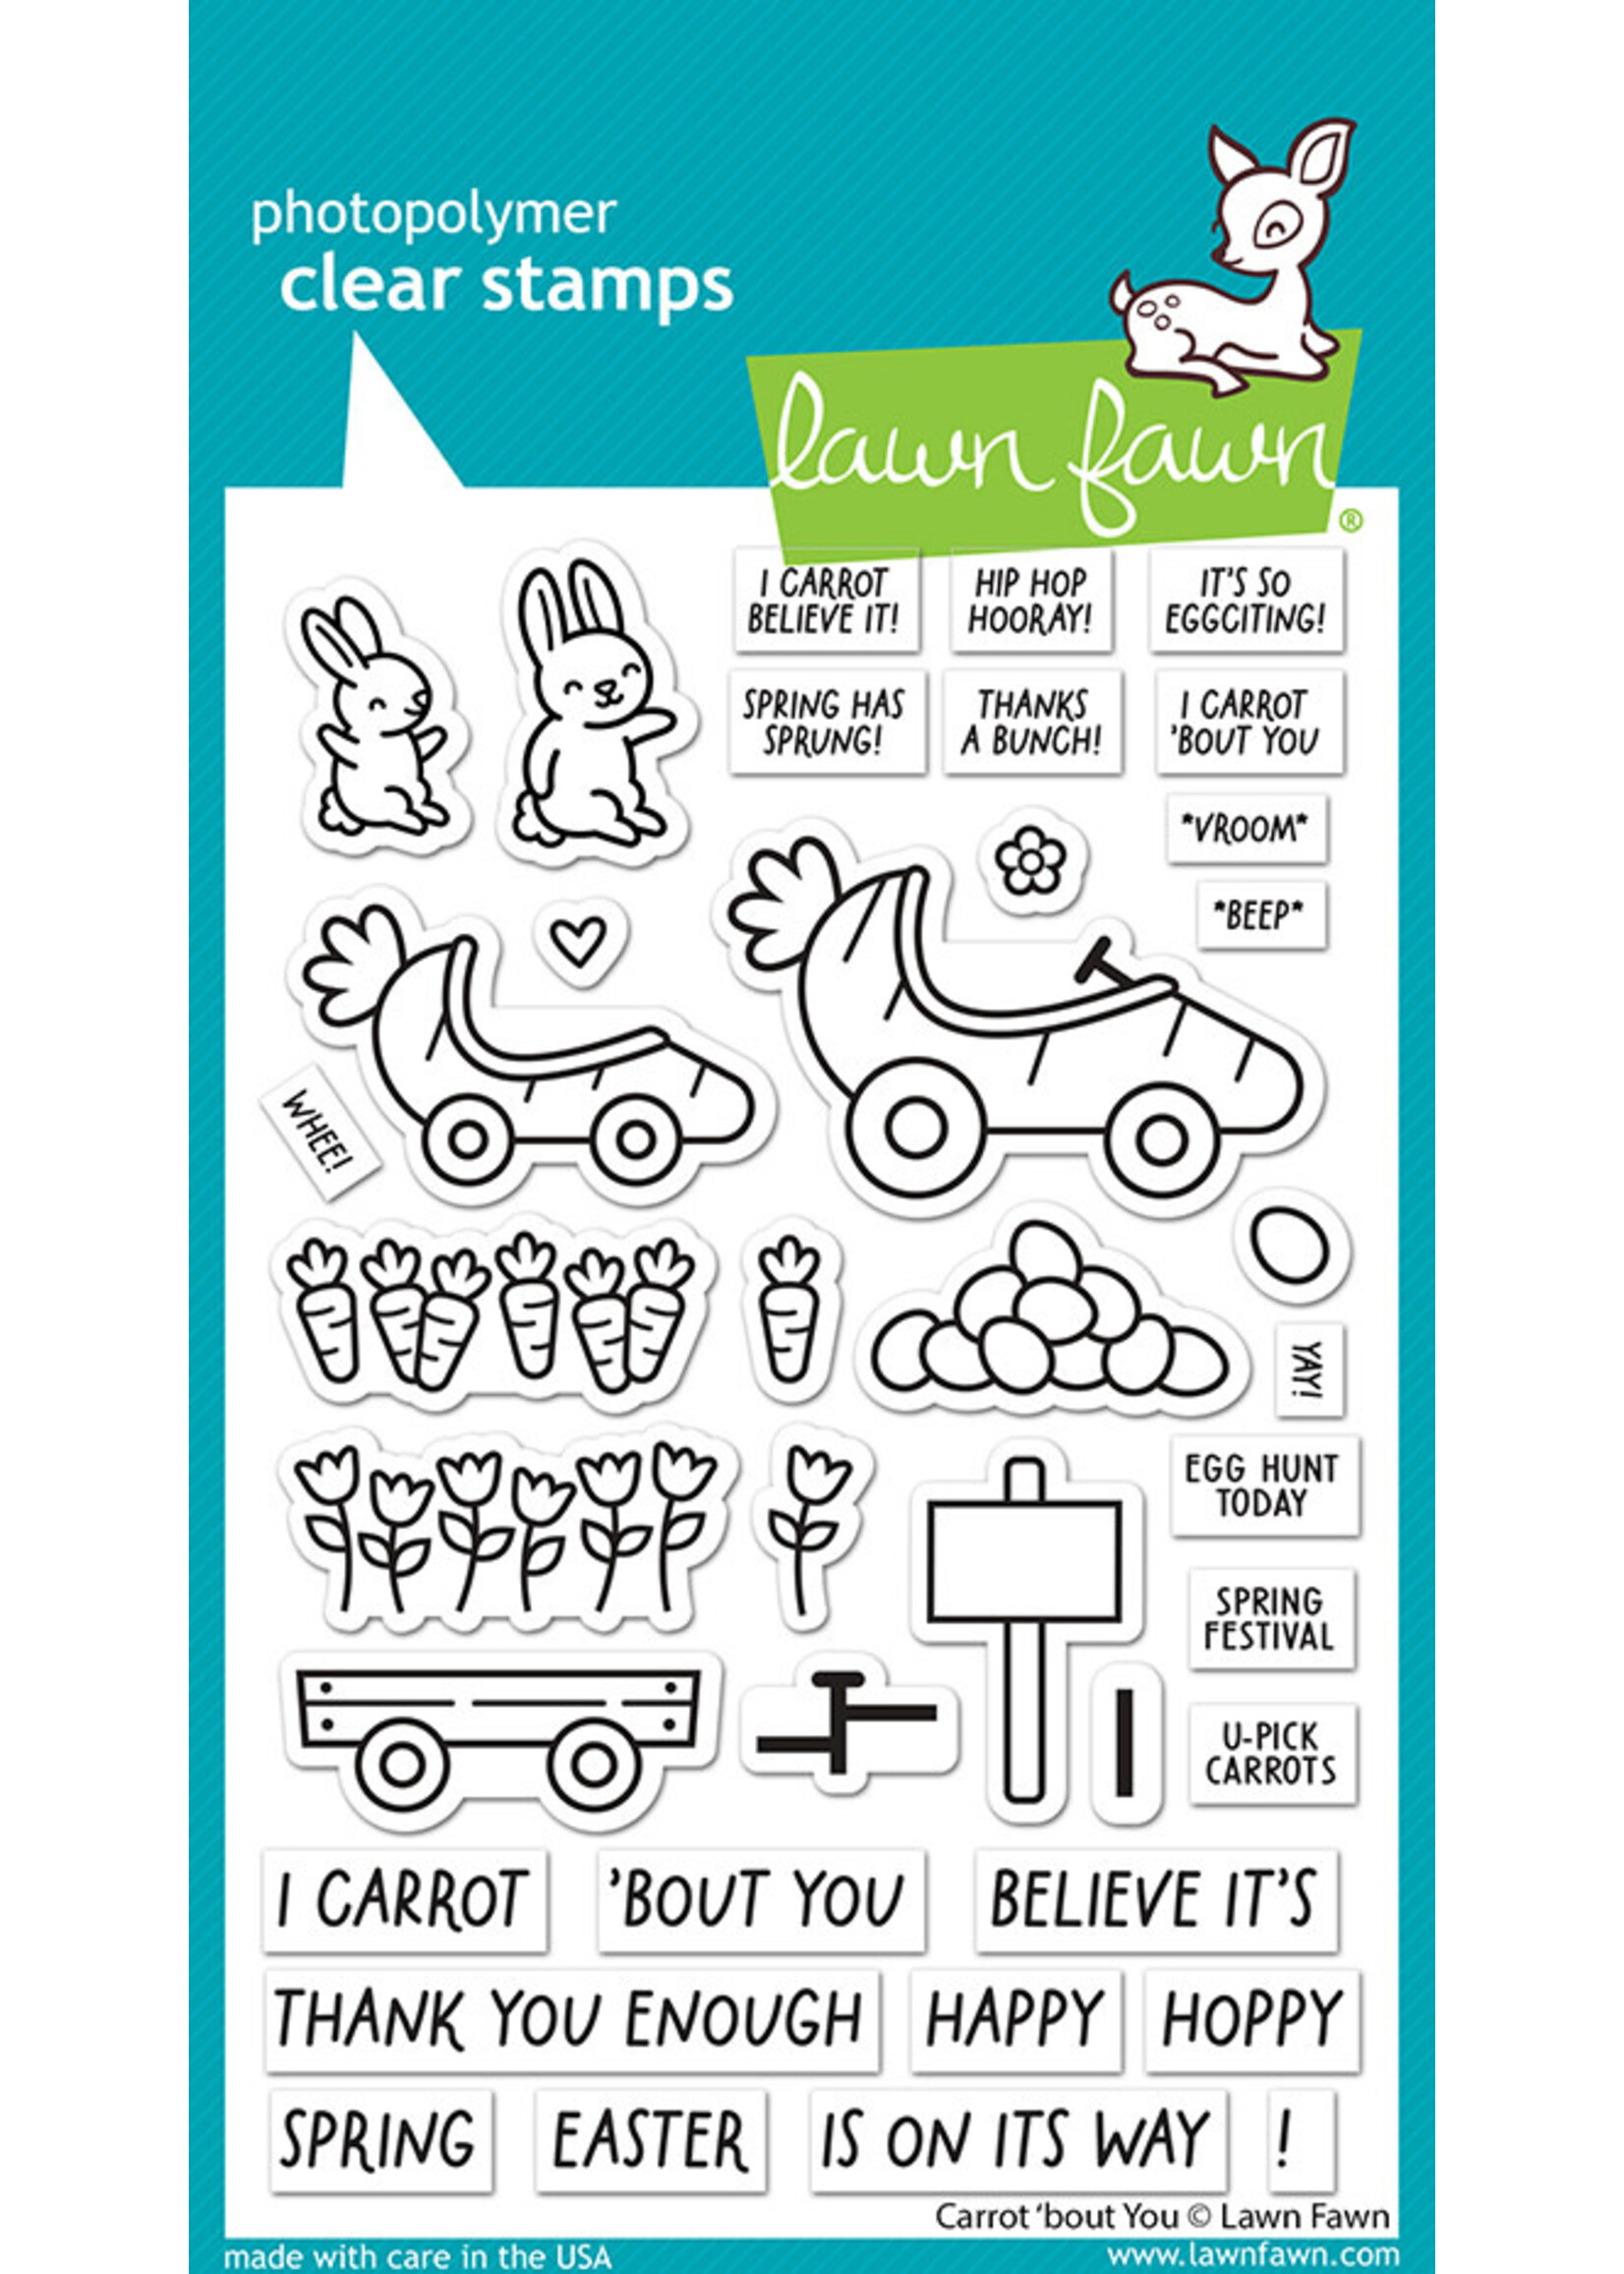 Lawn Fawn carrot 'bout you stamp & die bundle